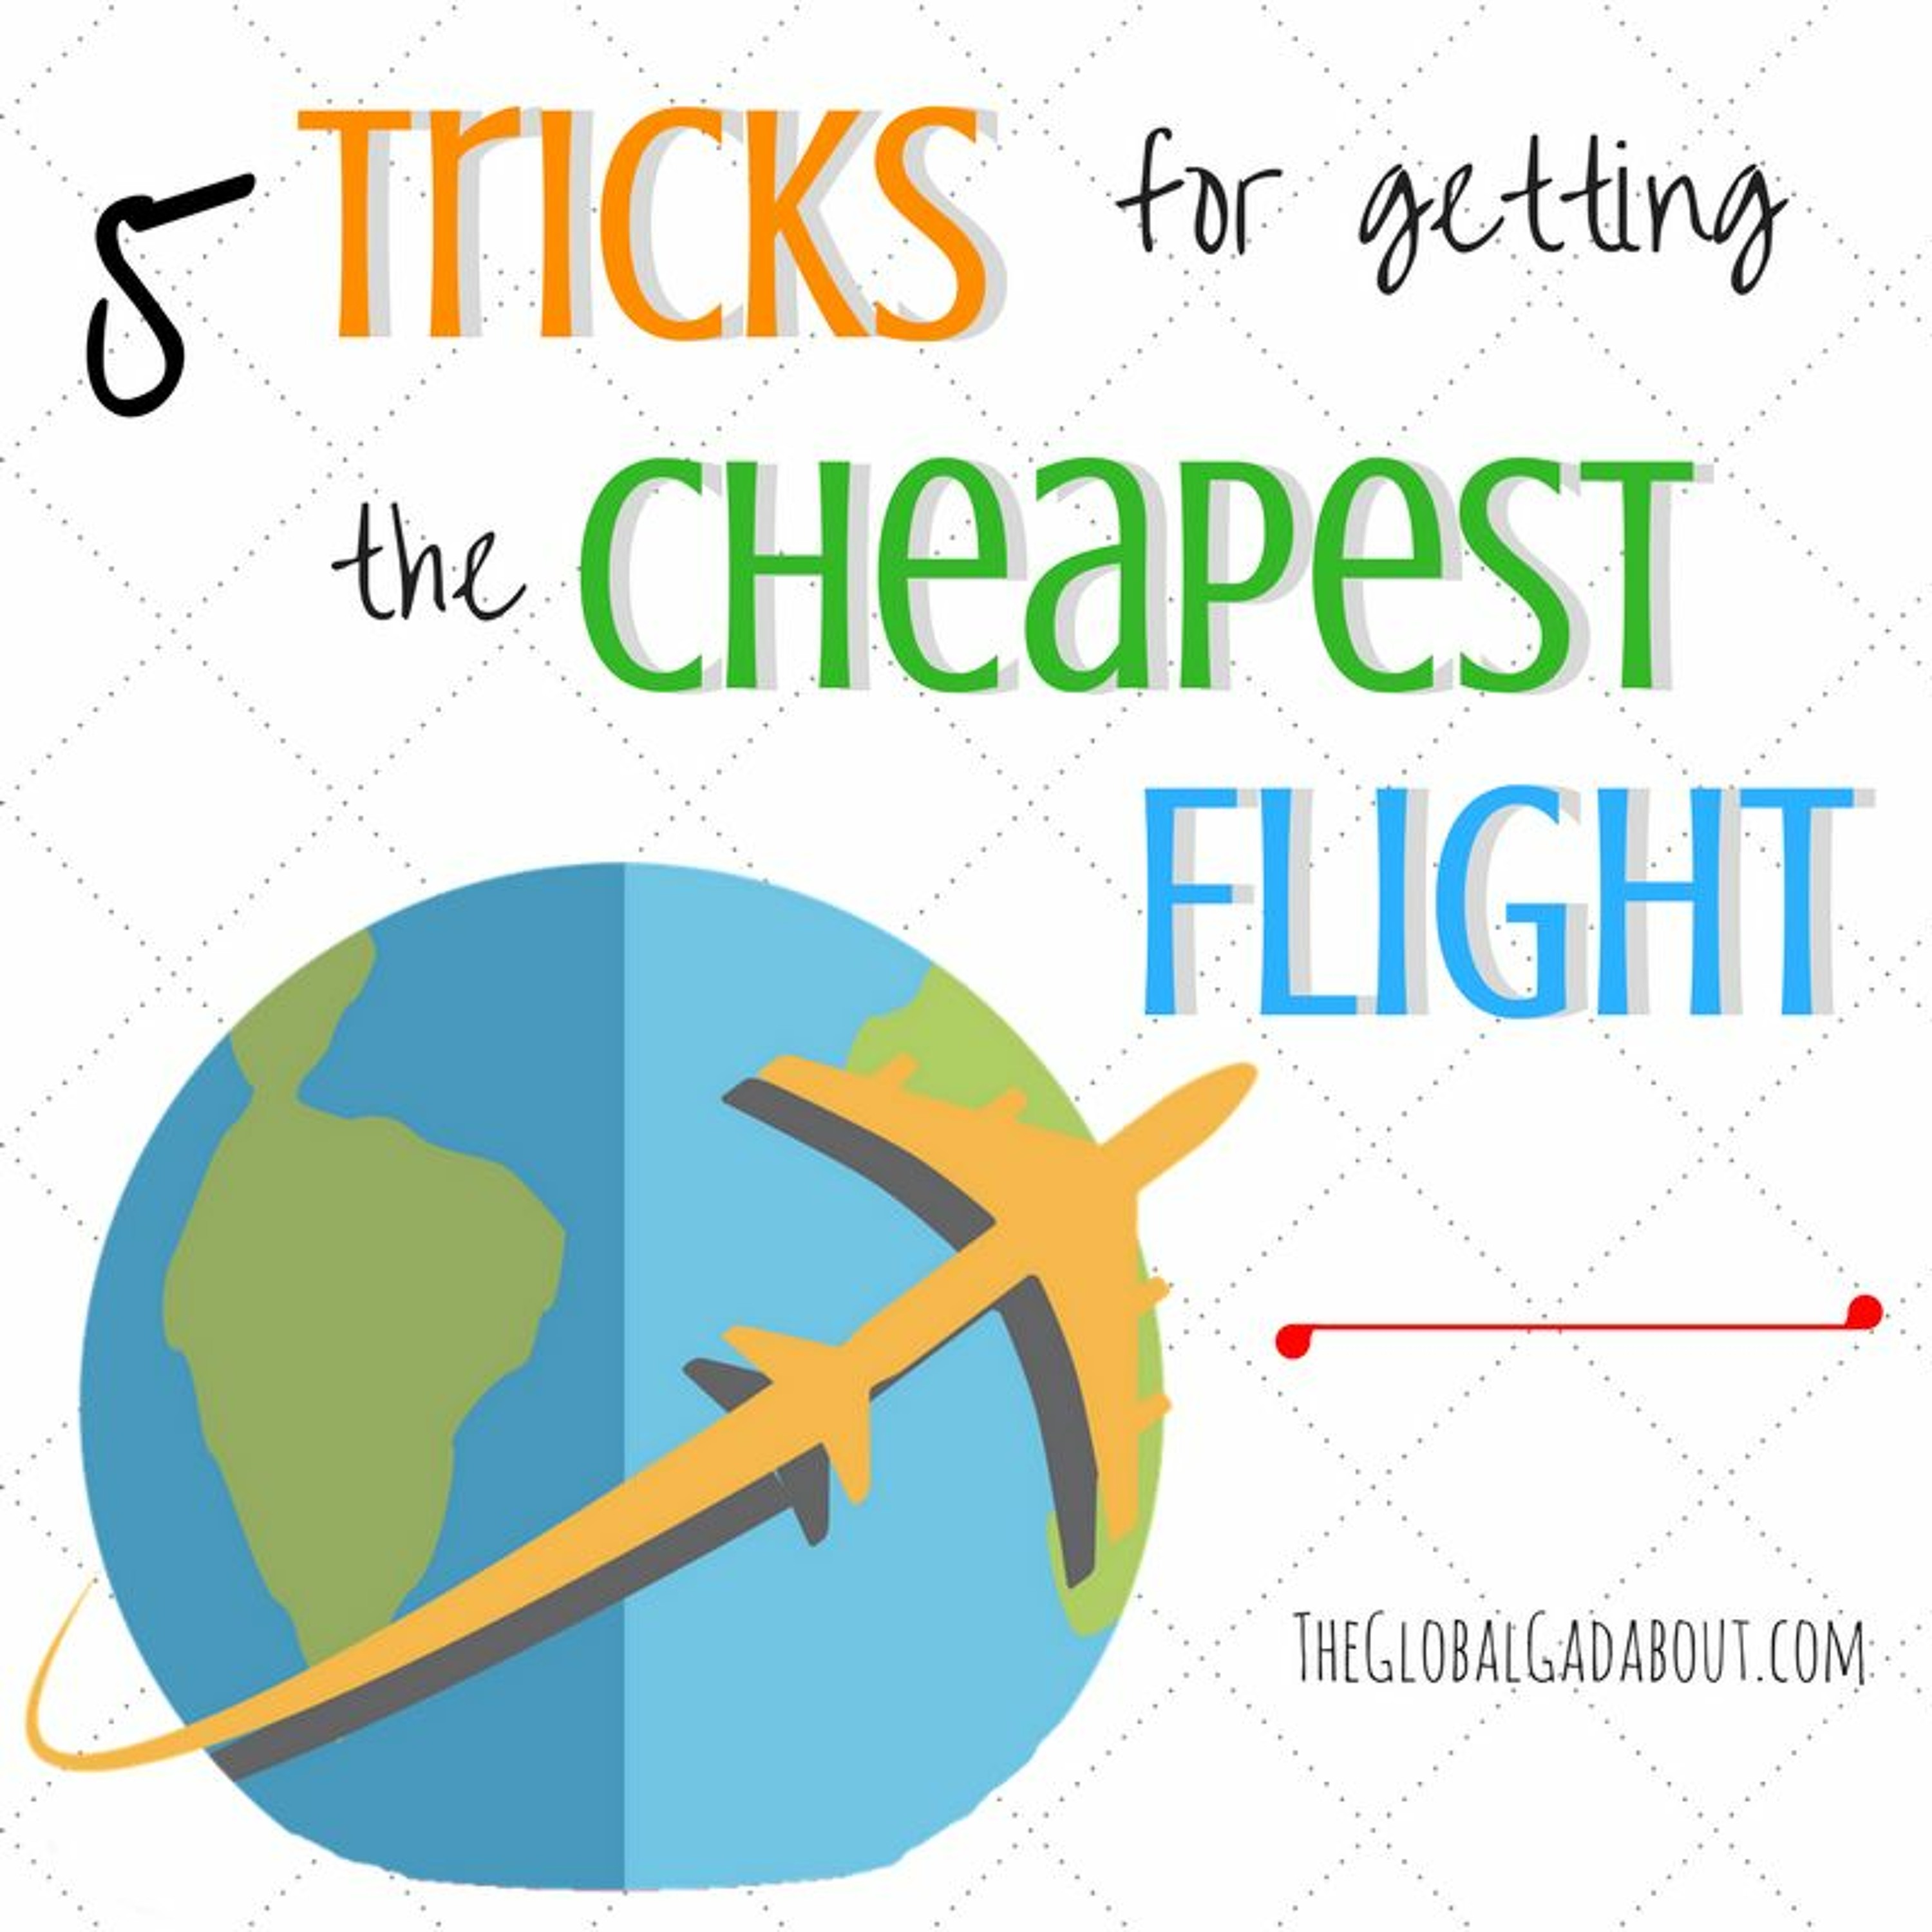 5 Tricks For Getting The Cheapest Flight